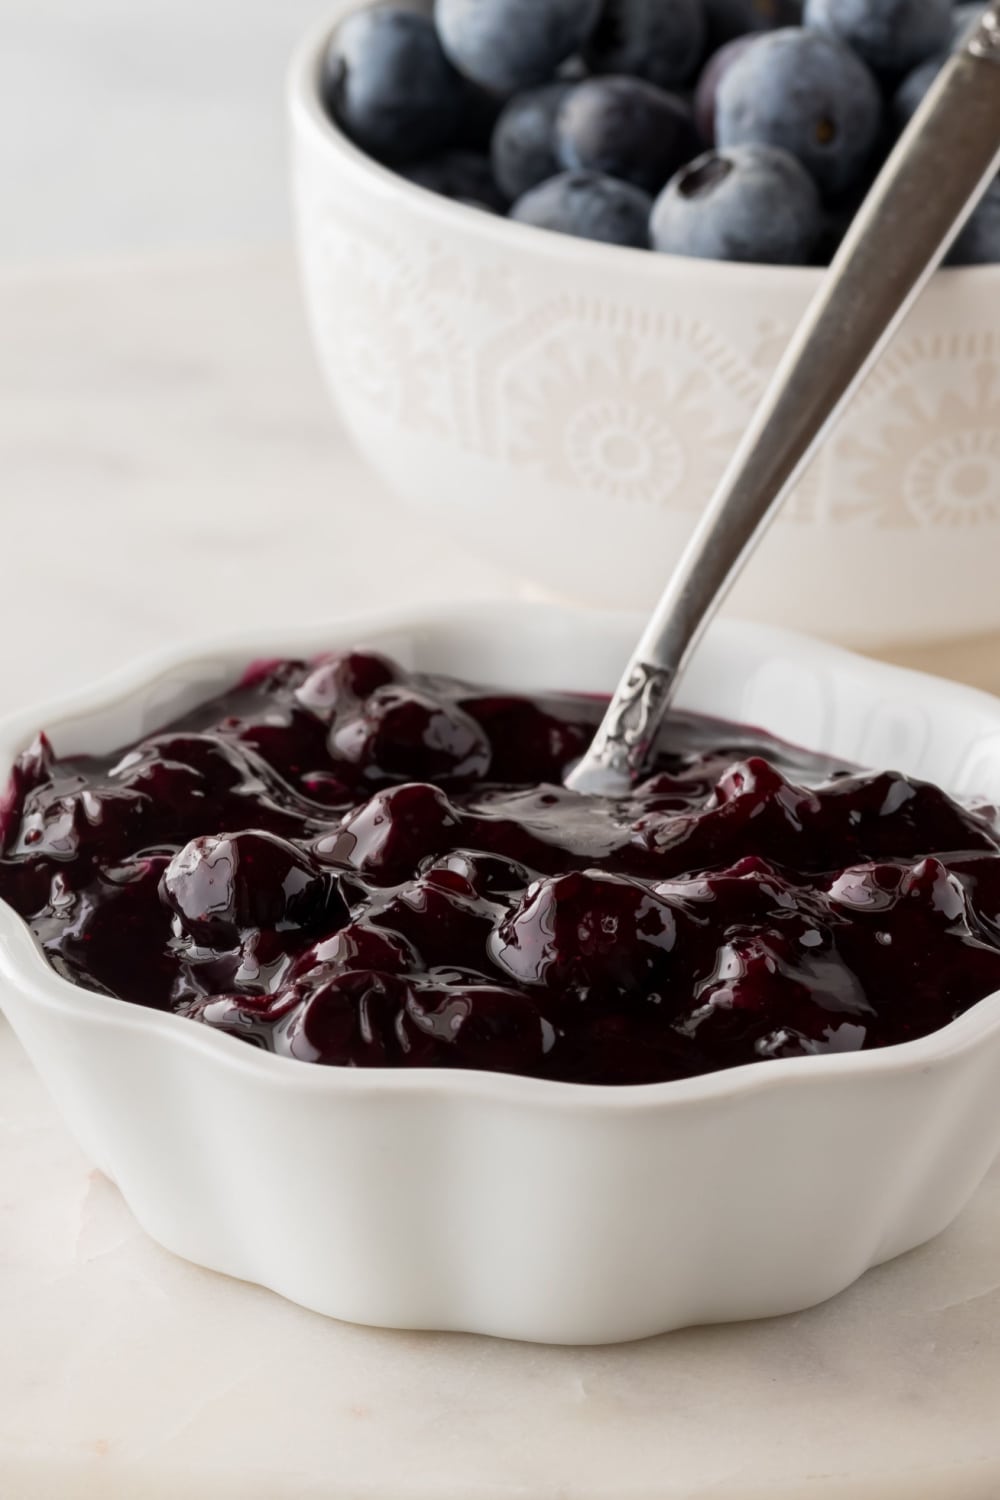 Spoon Dipped on a Bowl of Blueberry Sauce and a Bowl of Fresh Blueberries in the Background